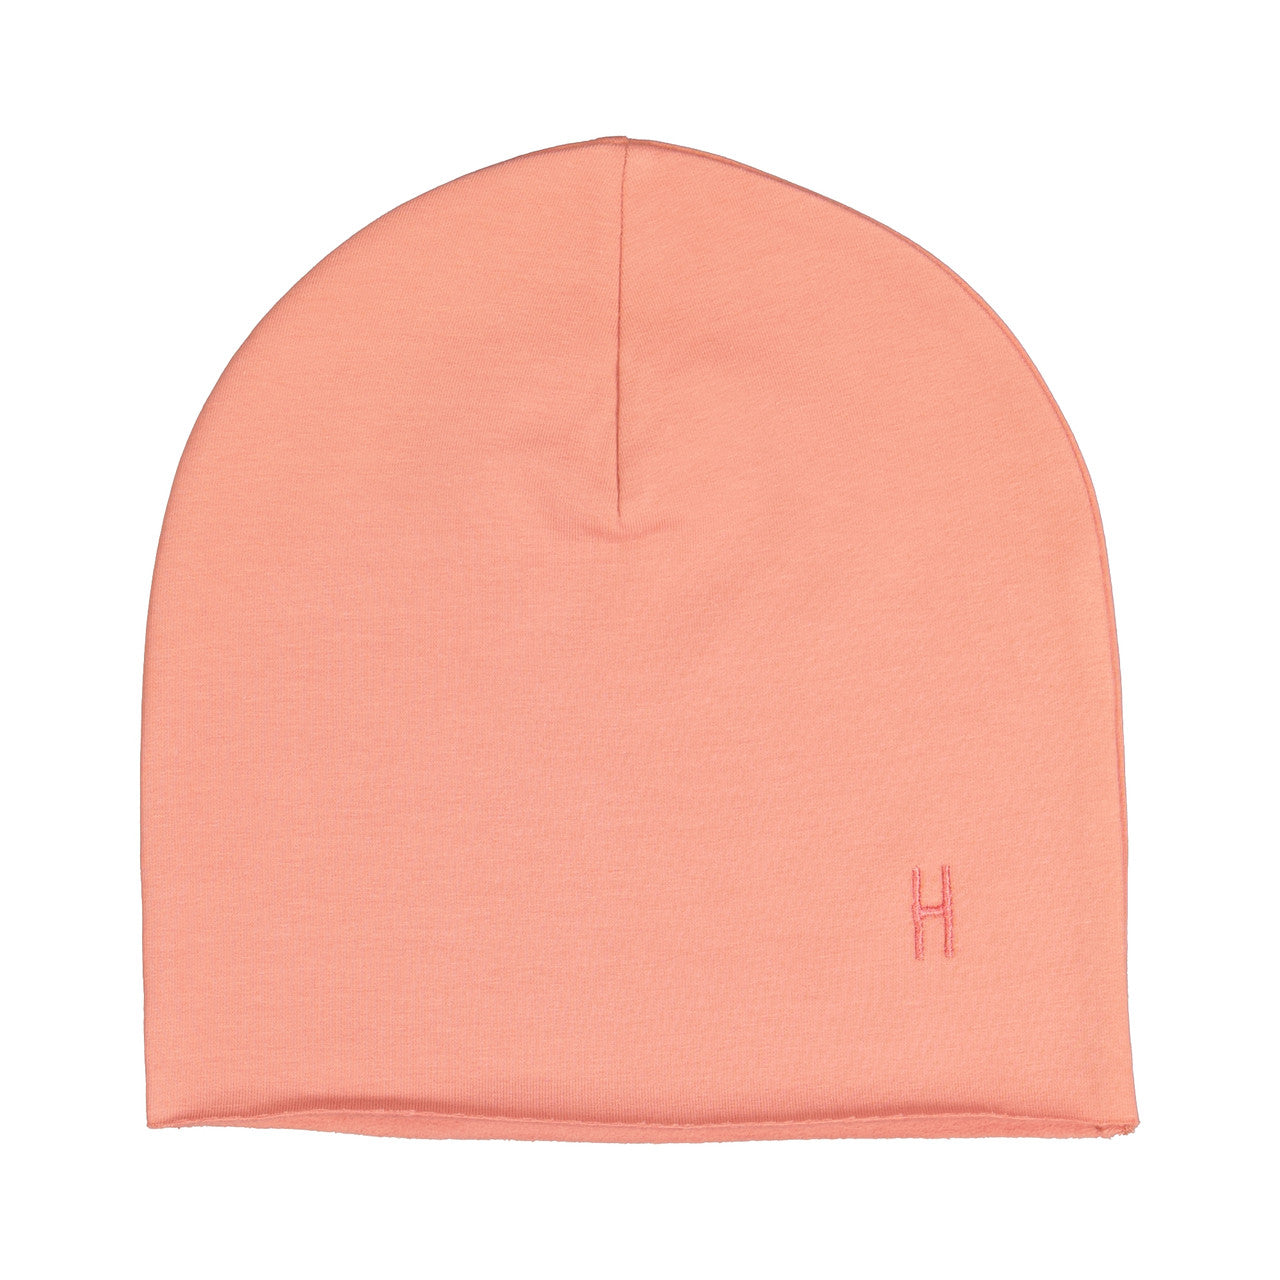 Organic cotton beanie, brushed inside for comfort and warmth, in Desert Sand